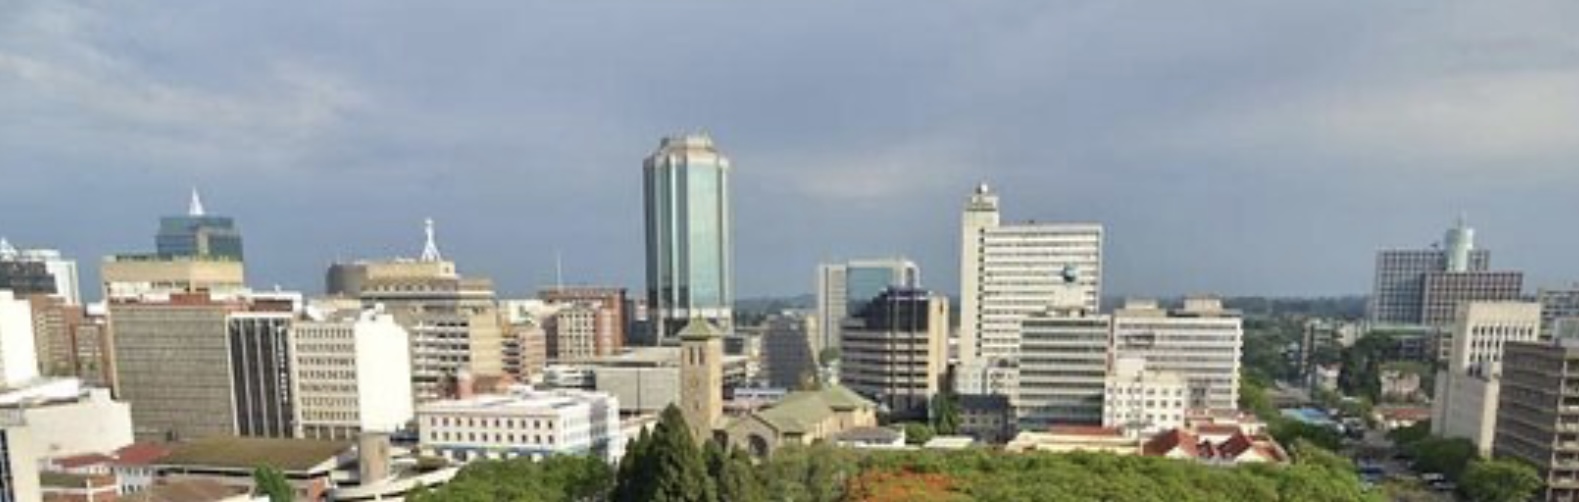 Postcard from Harare